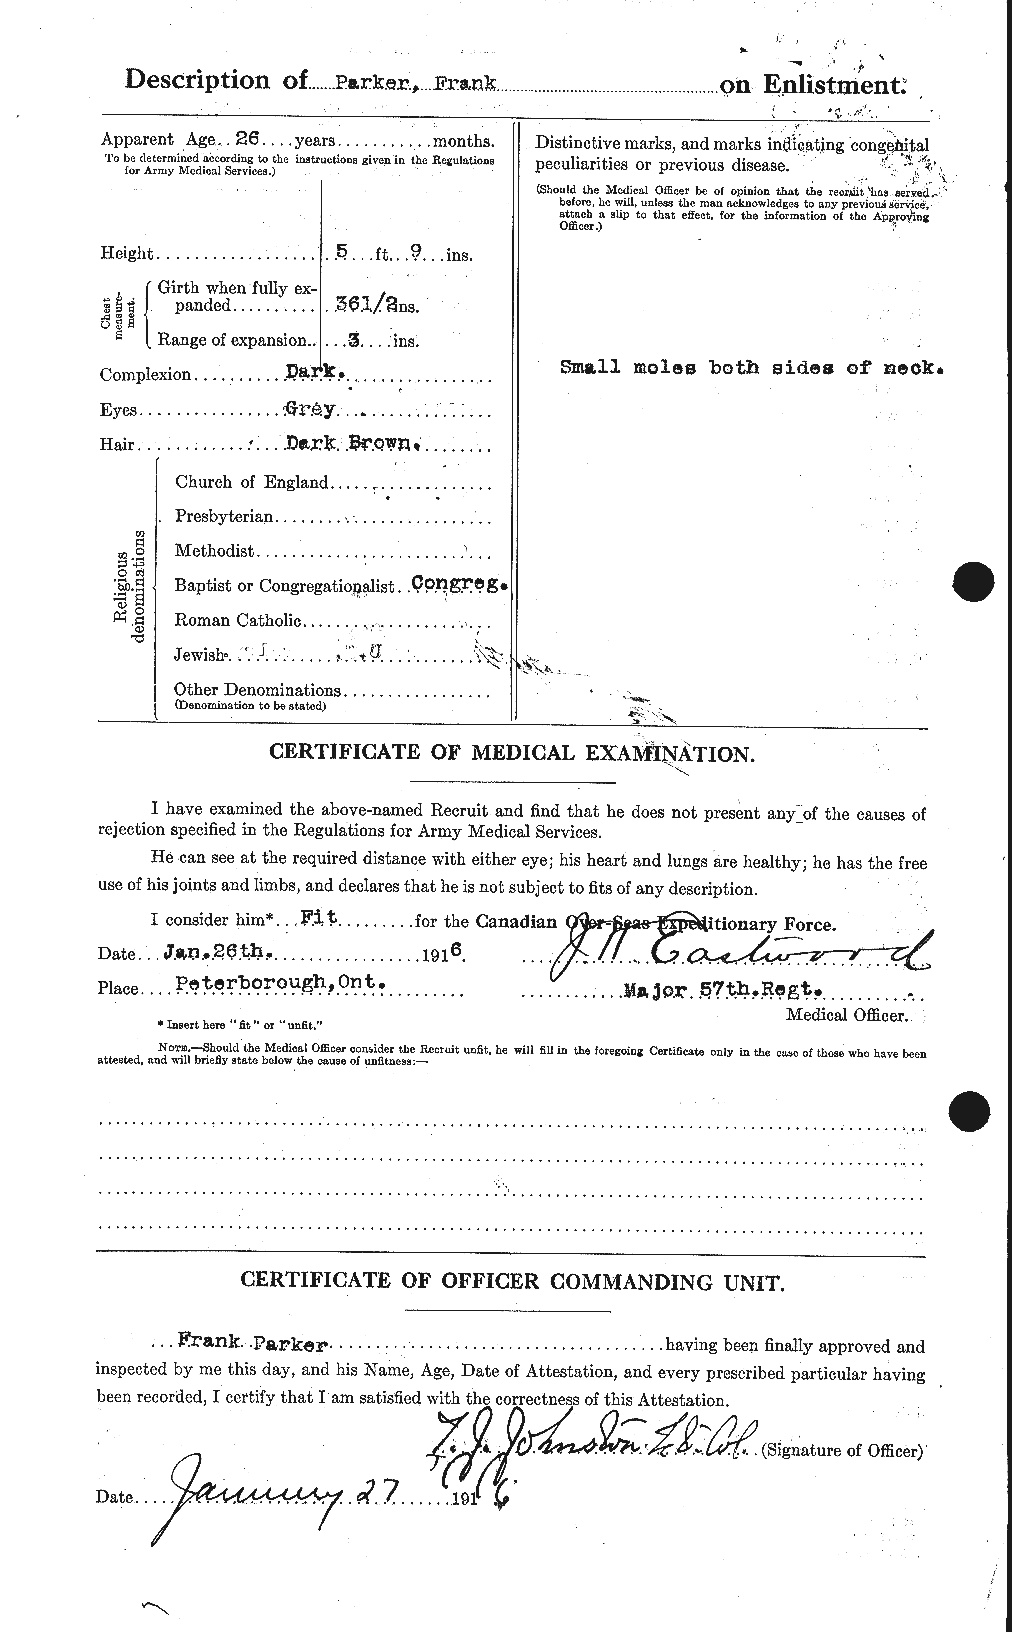 Personnel Records of the First World War - CEF 565184b